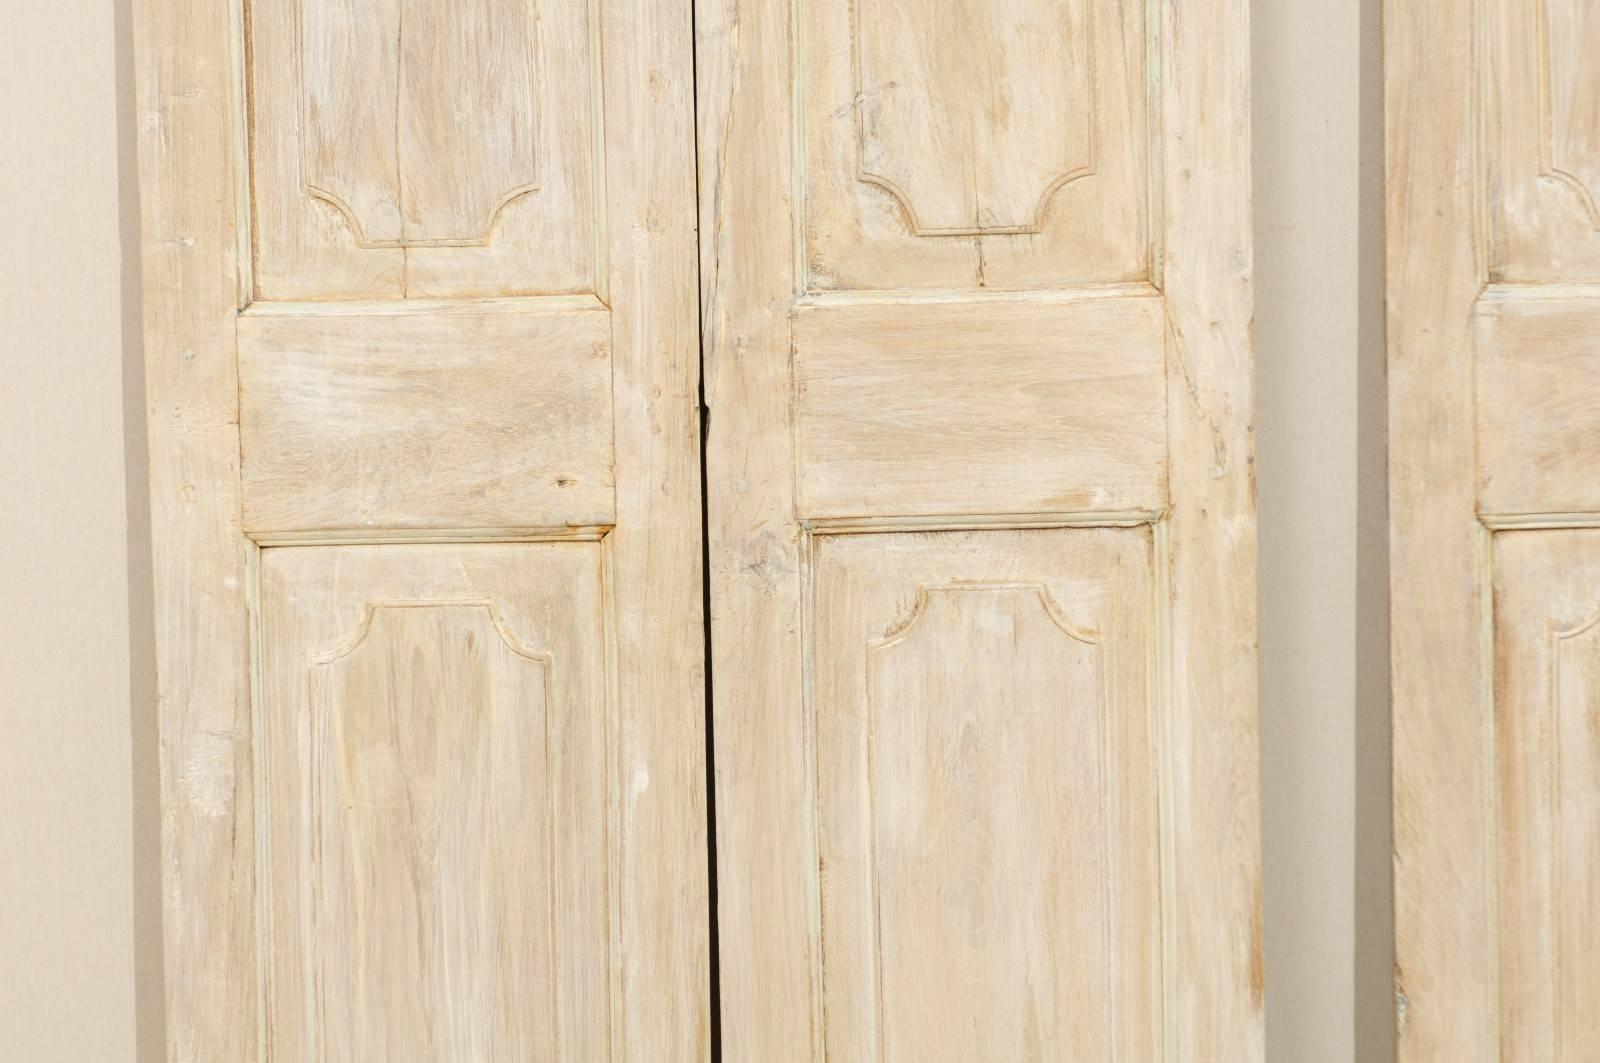 One Pair of Lovely French 19th Century Doors in Antiqued Beige and White Hues 1